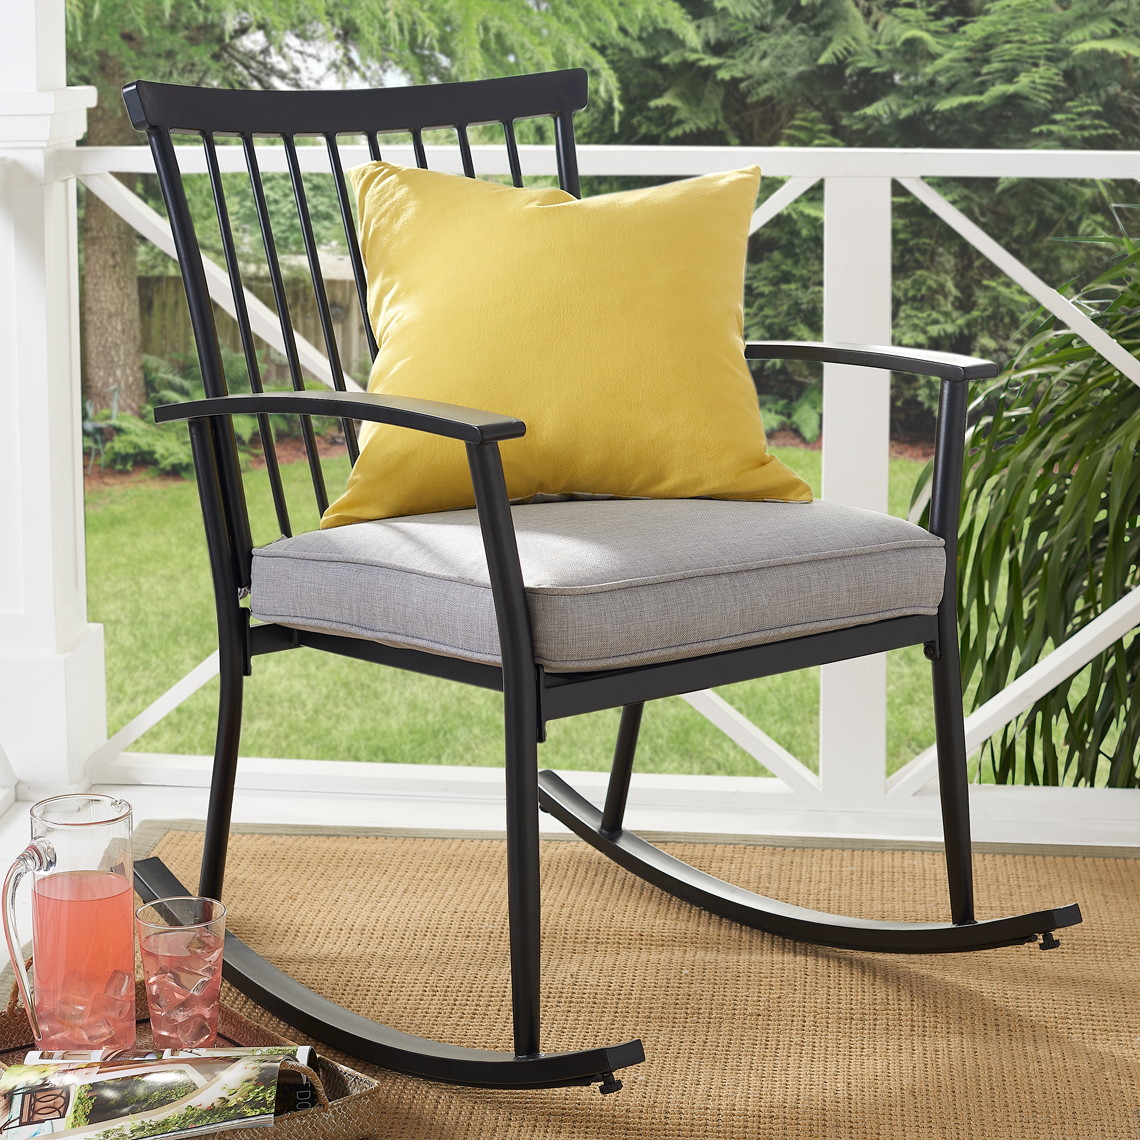 Patio Clearance Rocking Chairs As Low As 75 At Walmart The